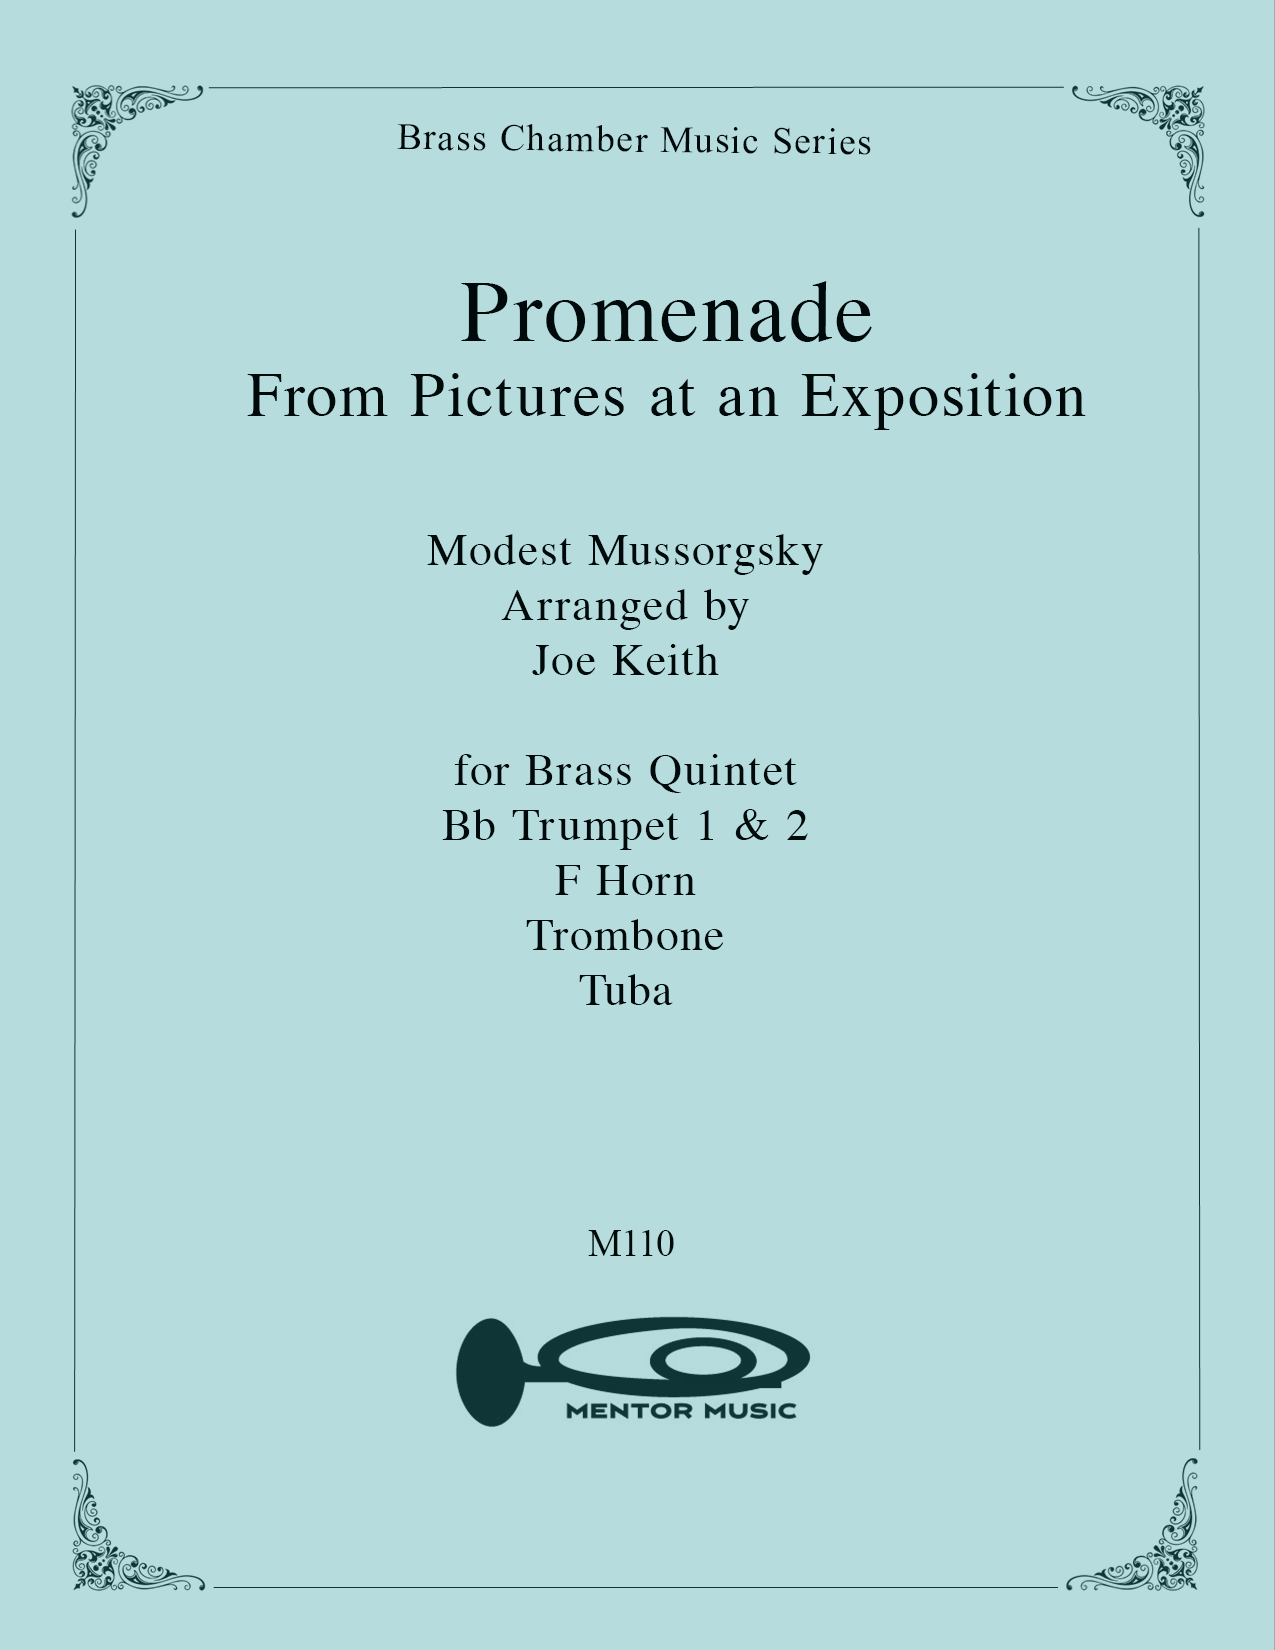 Promenade From Pictures at an Exposition - Brass Quintet